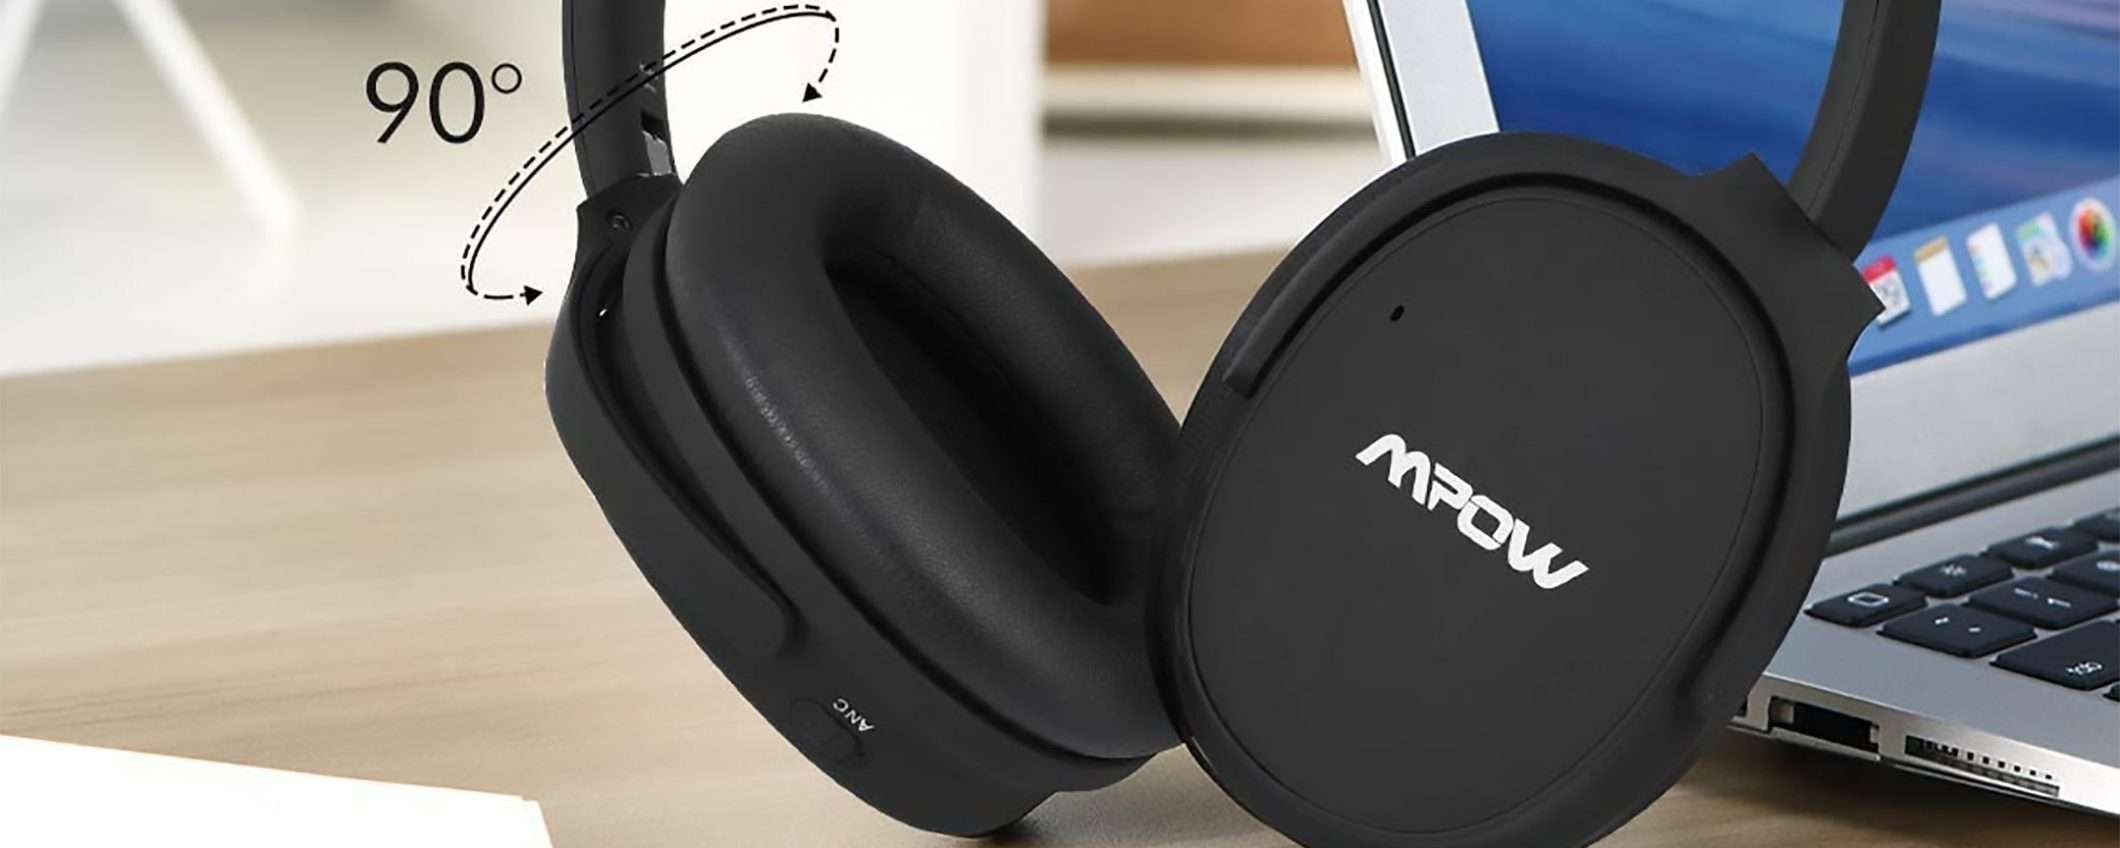 Cuffie Over Ear con noise cancellation a € 34,99